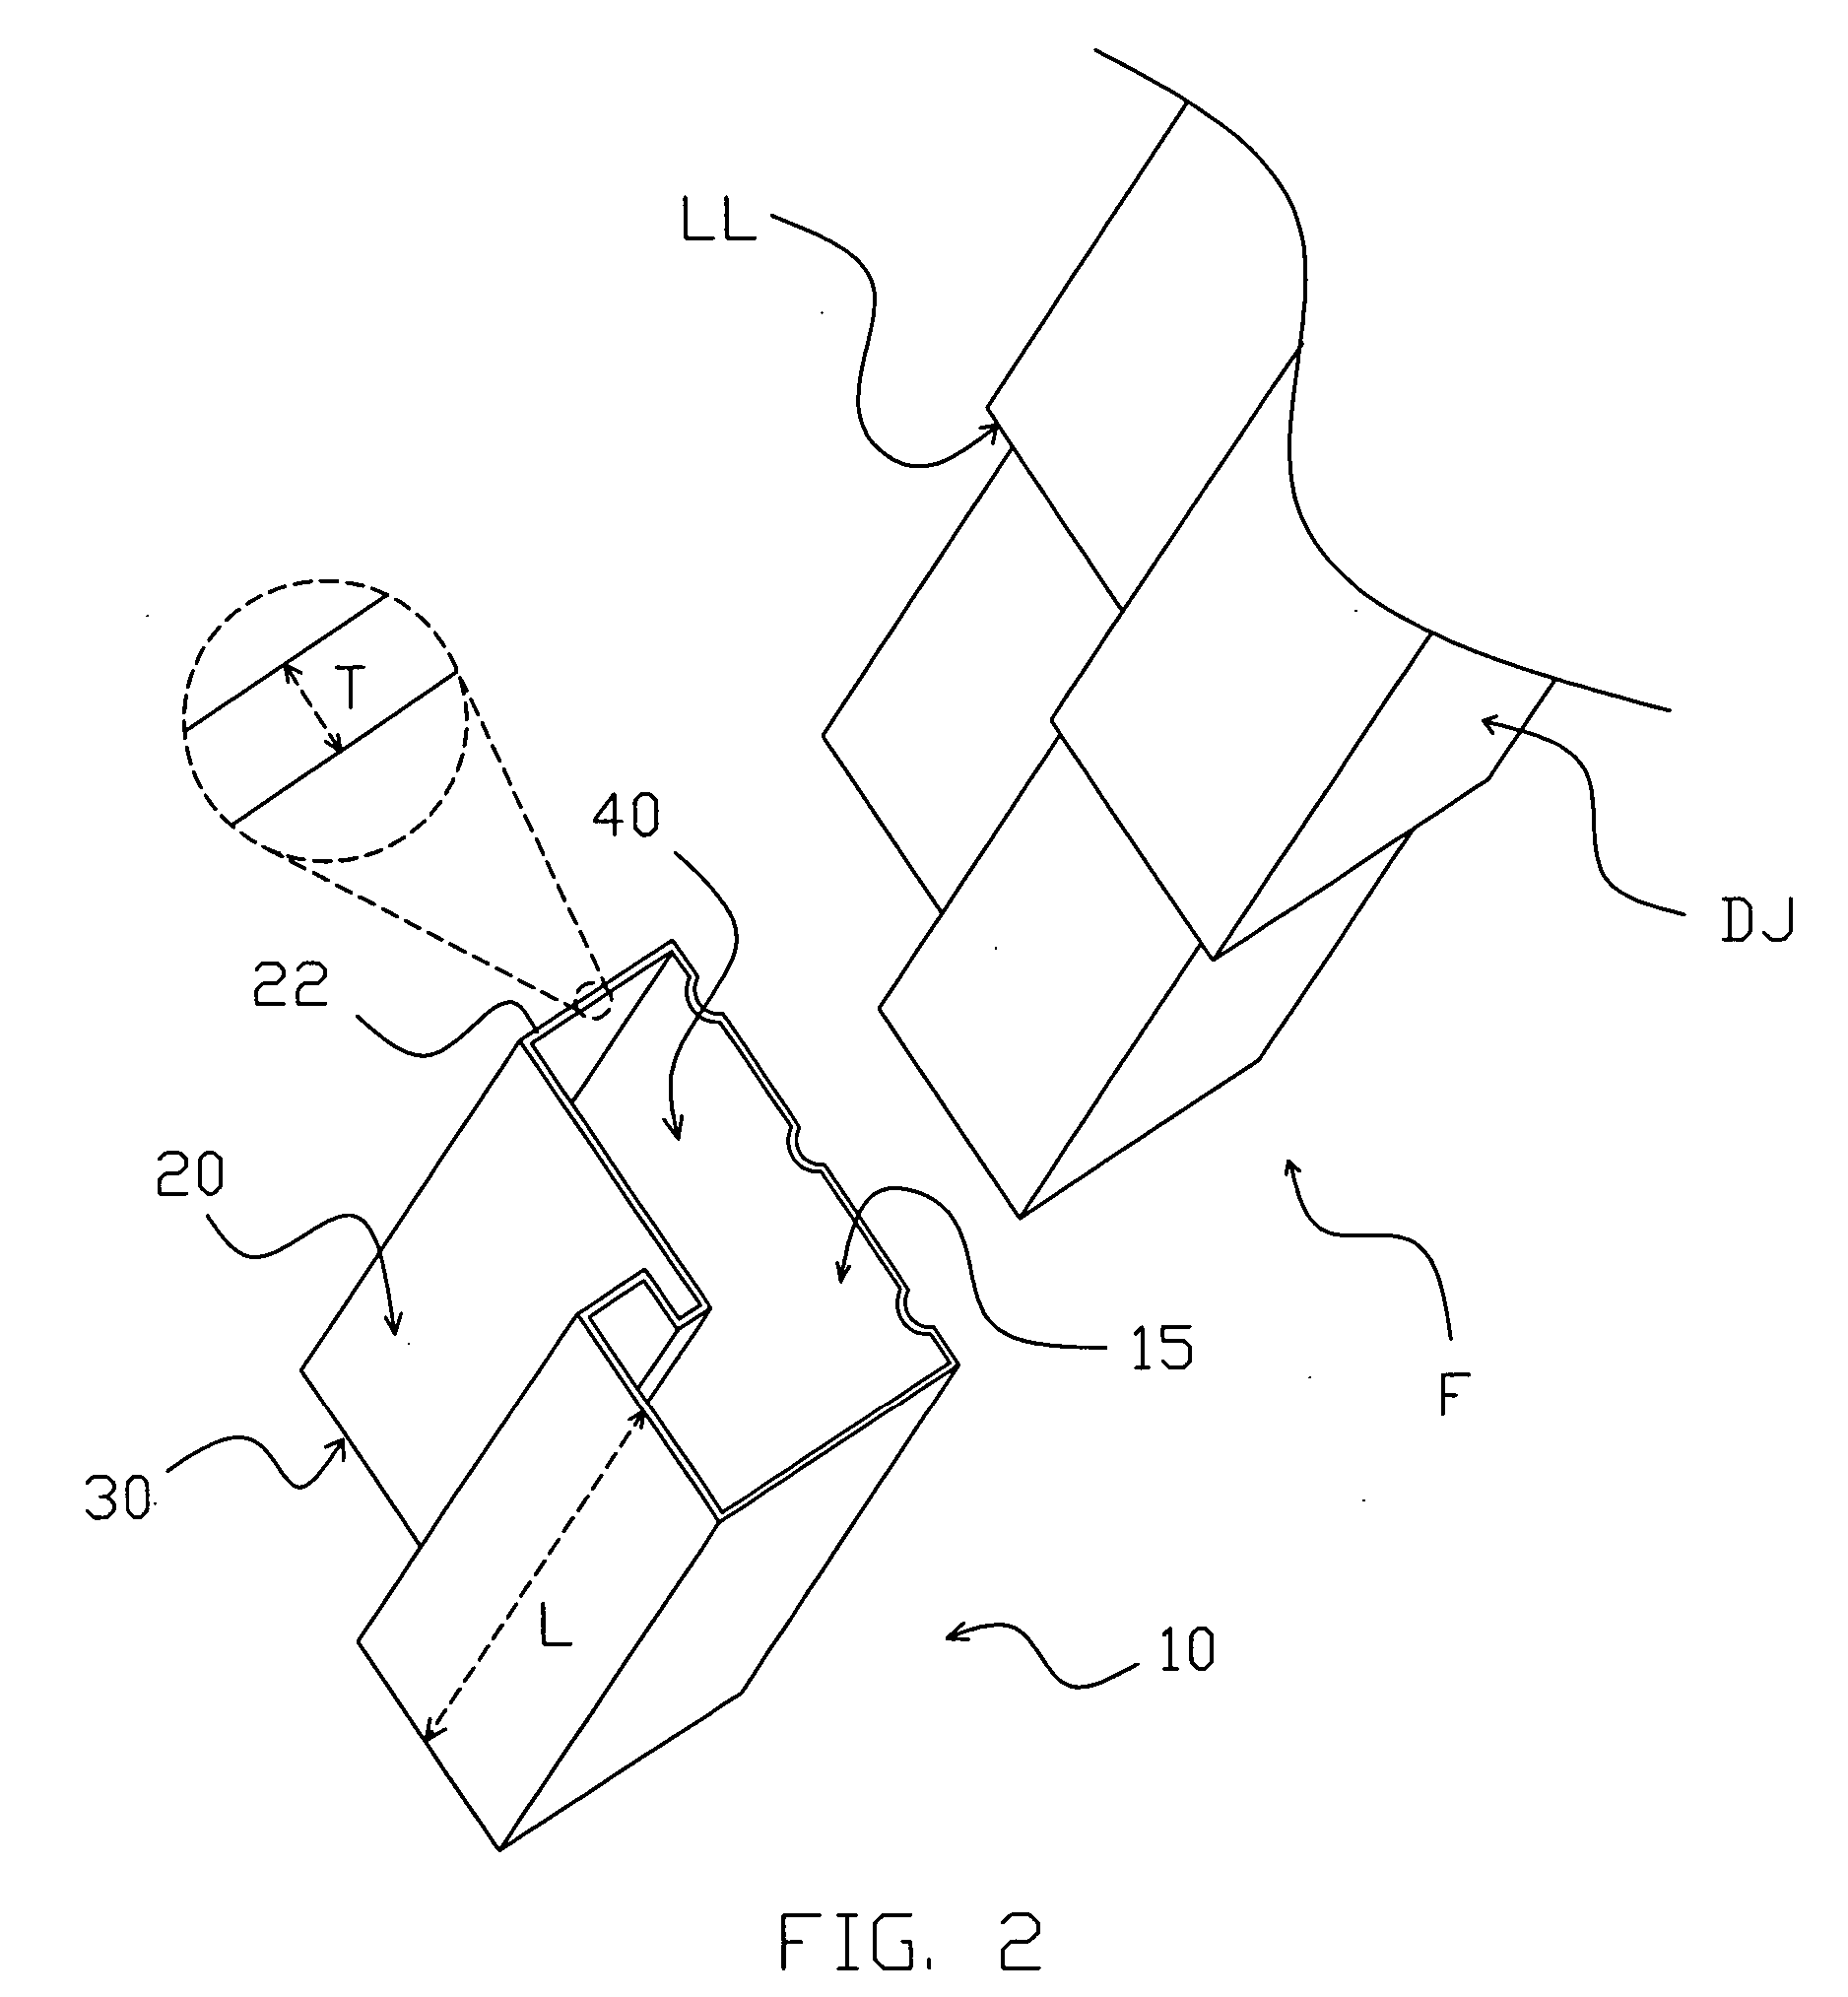 Doorjamb end cap and method of installation therefor